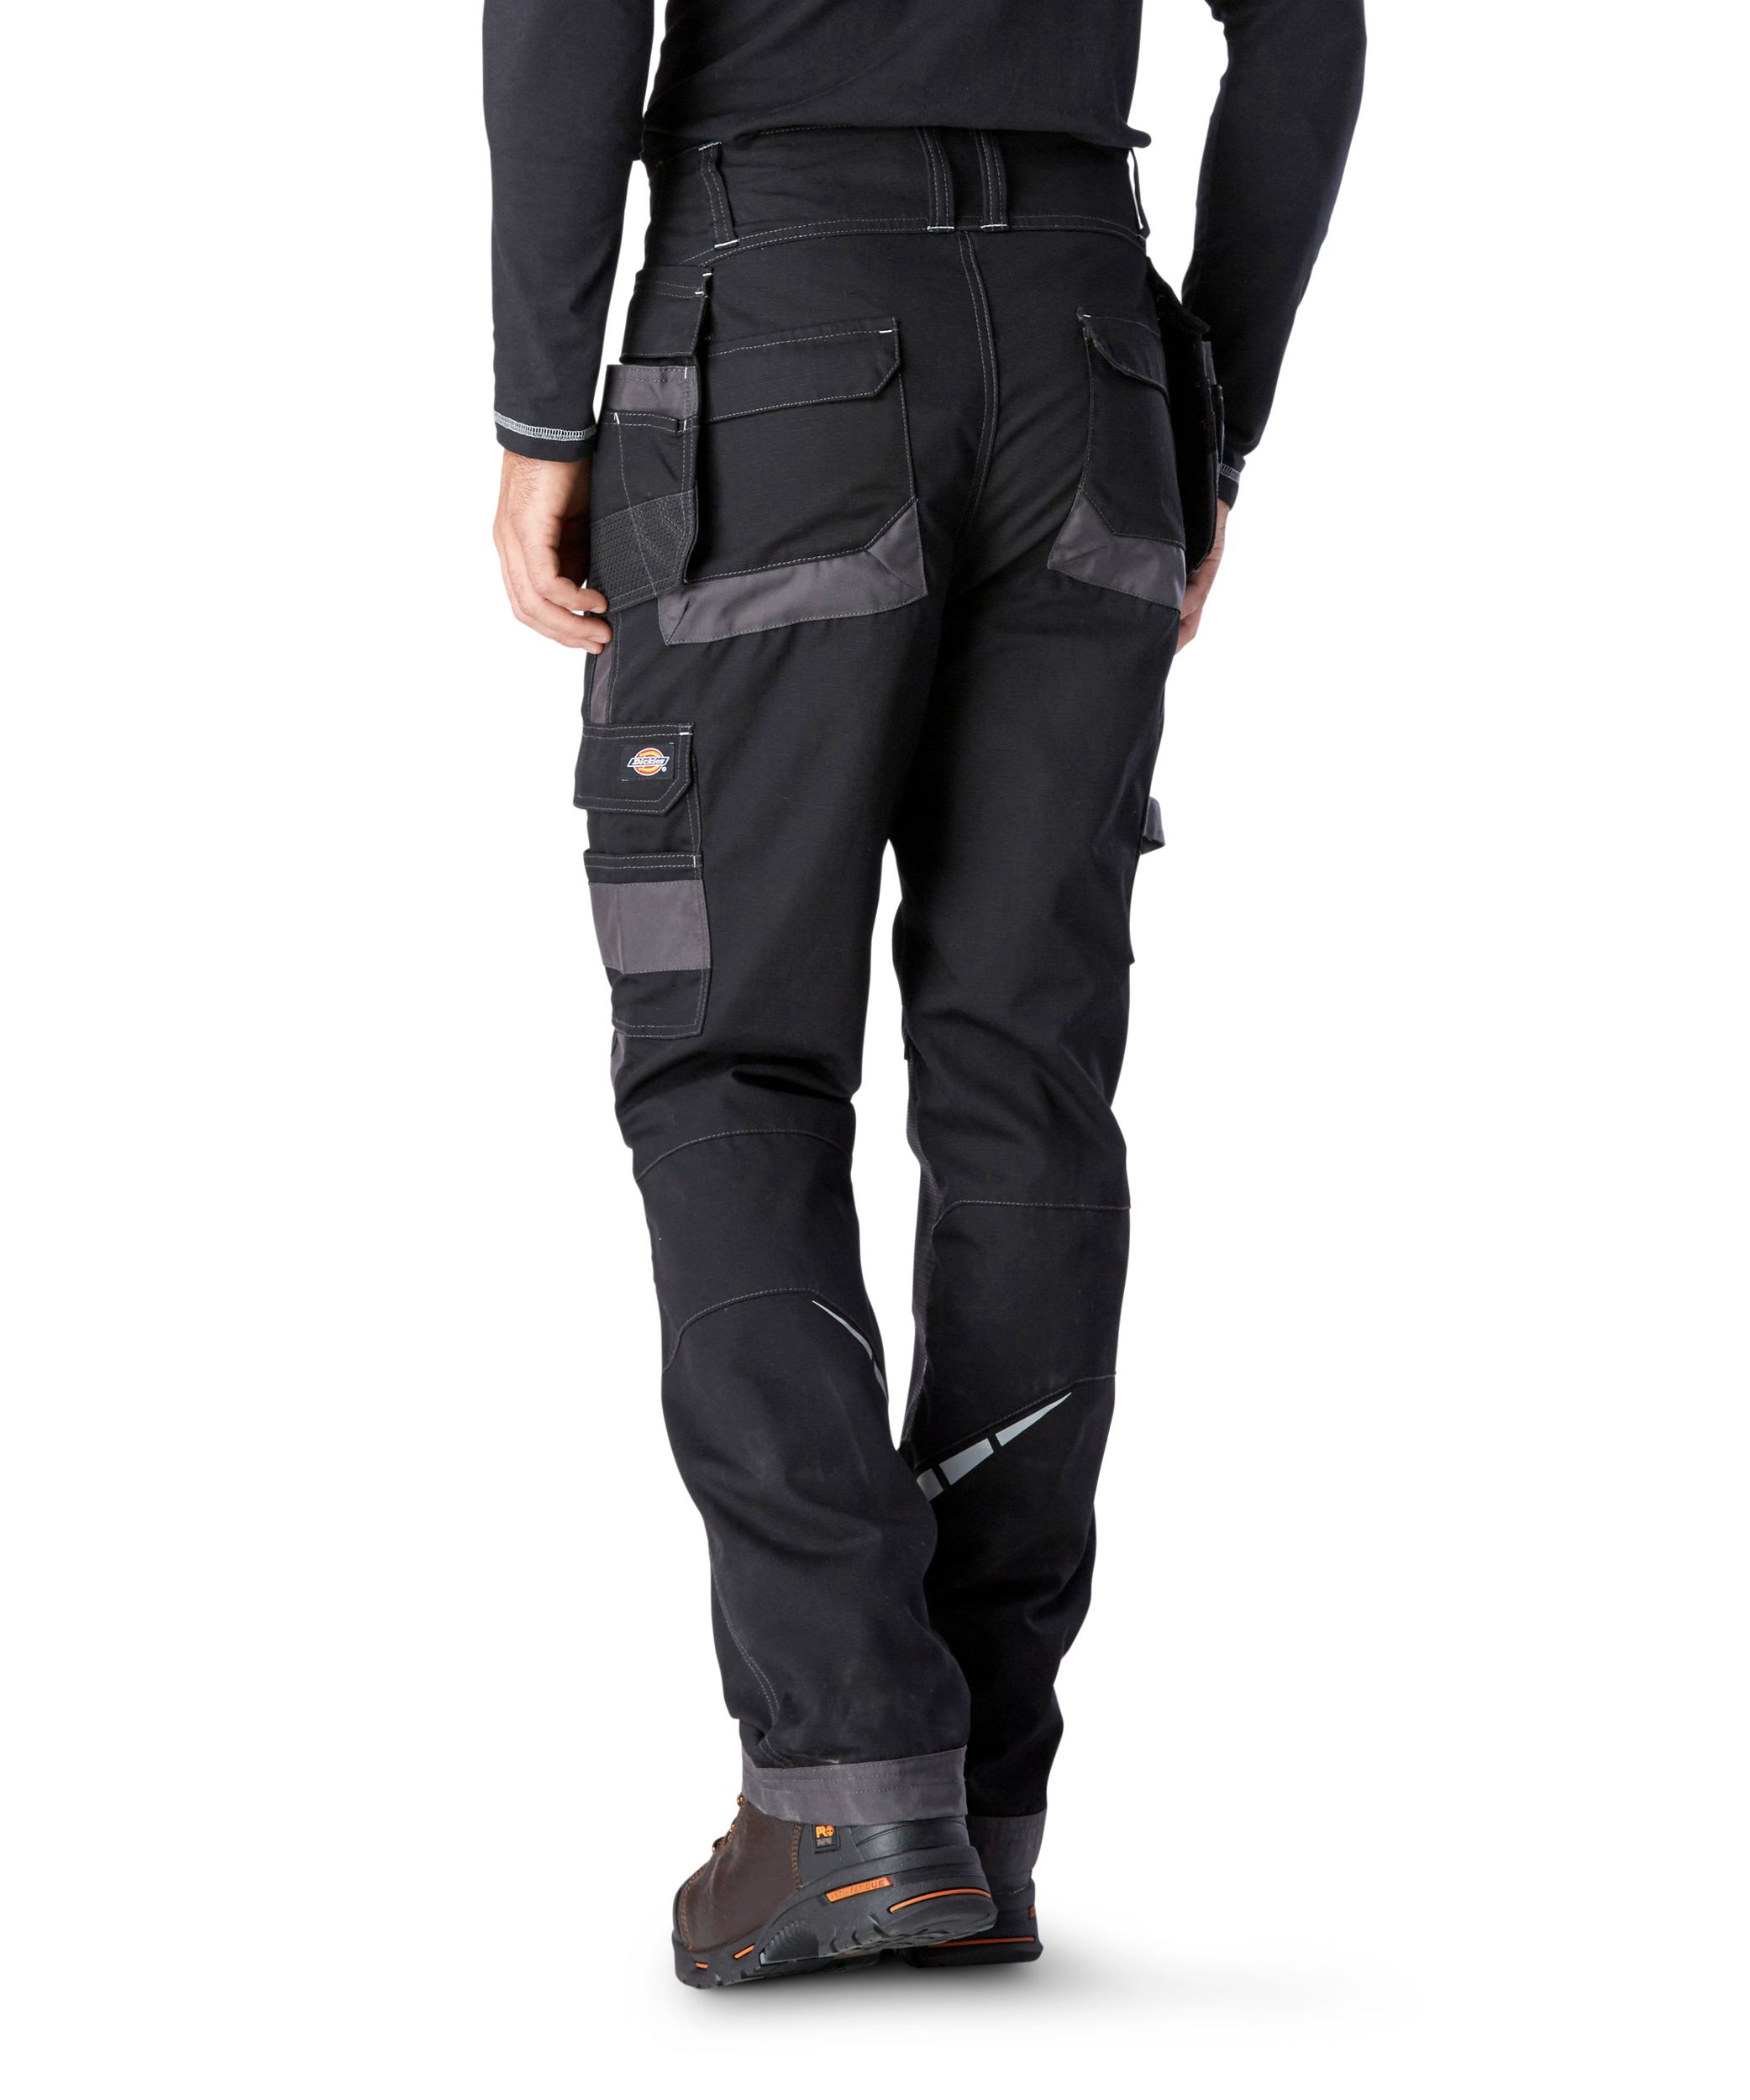 YUHAOTIN Work Trousers with Knee Pads Motorbike Trousers Mens